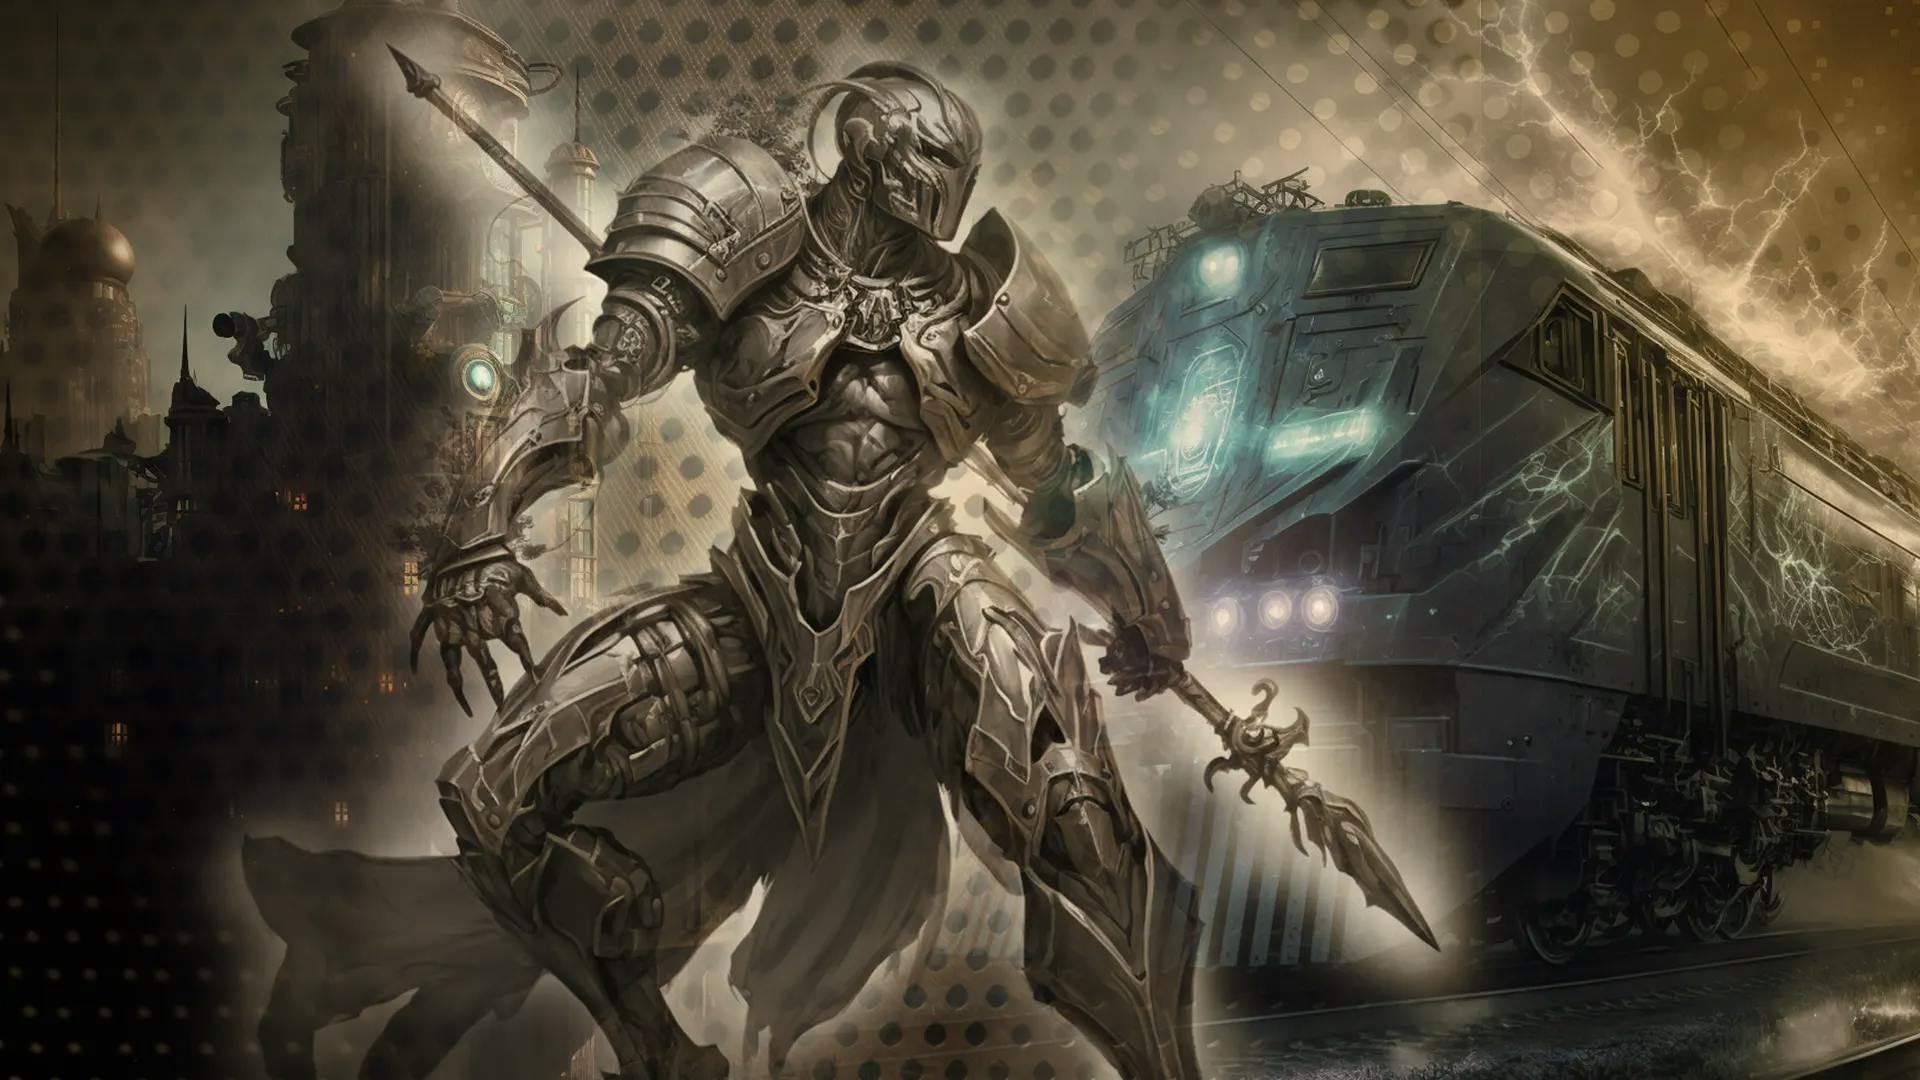 Eberron: Oracle of War (new level 1-20 campaign, beginners welcome!)